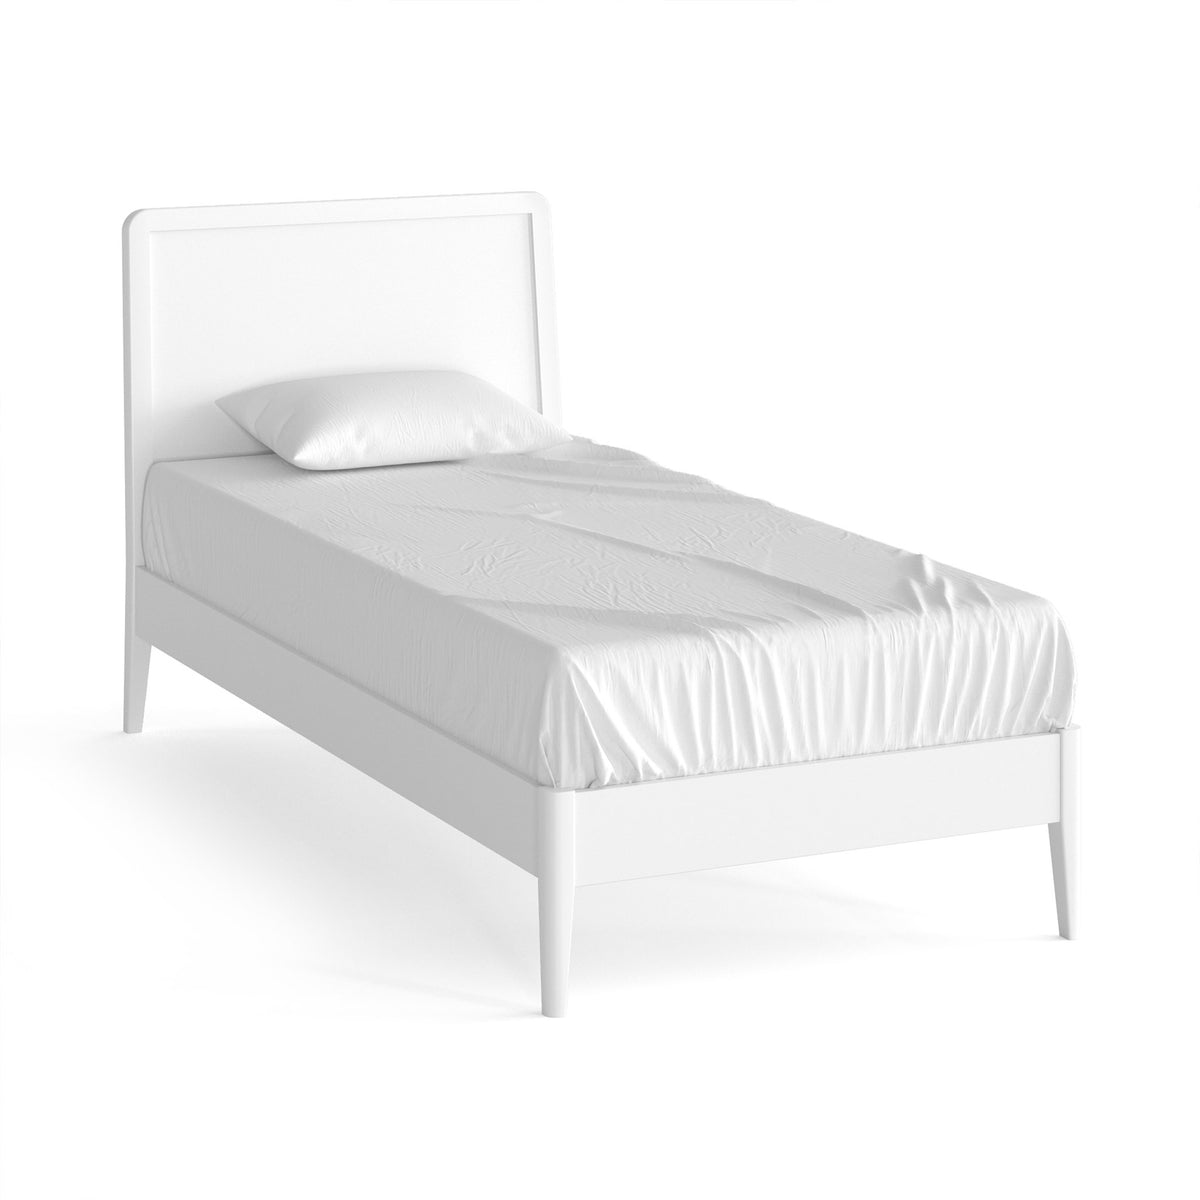 Chester White Single Bed Frame by Roseland Furniture